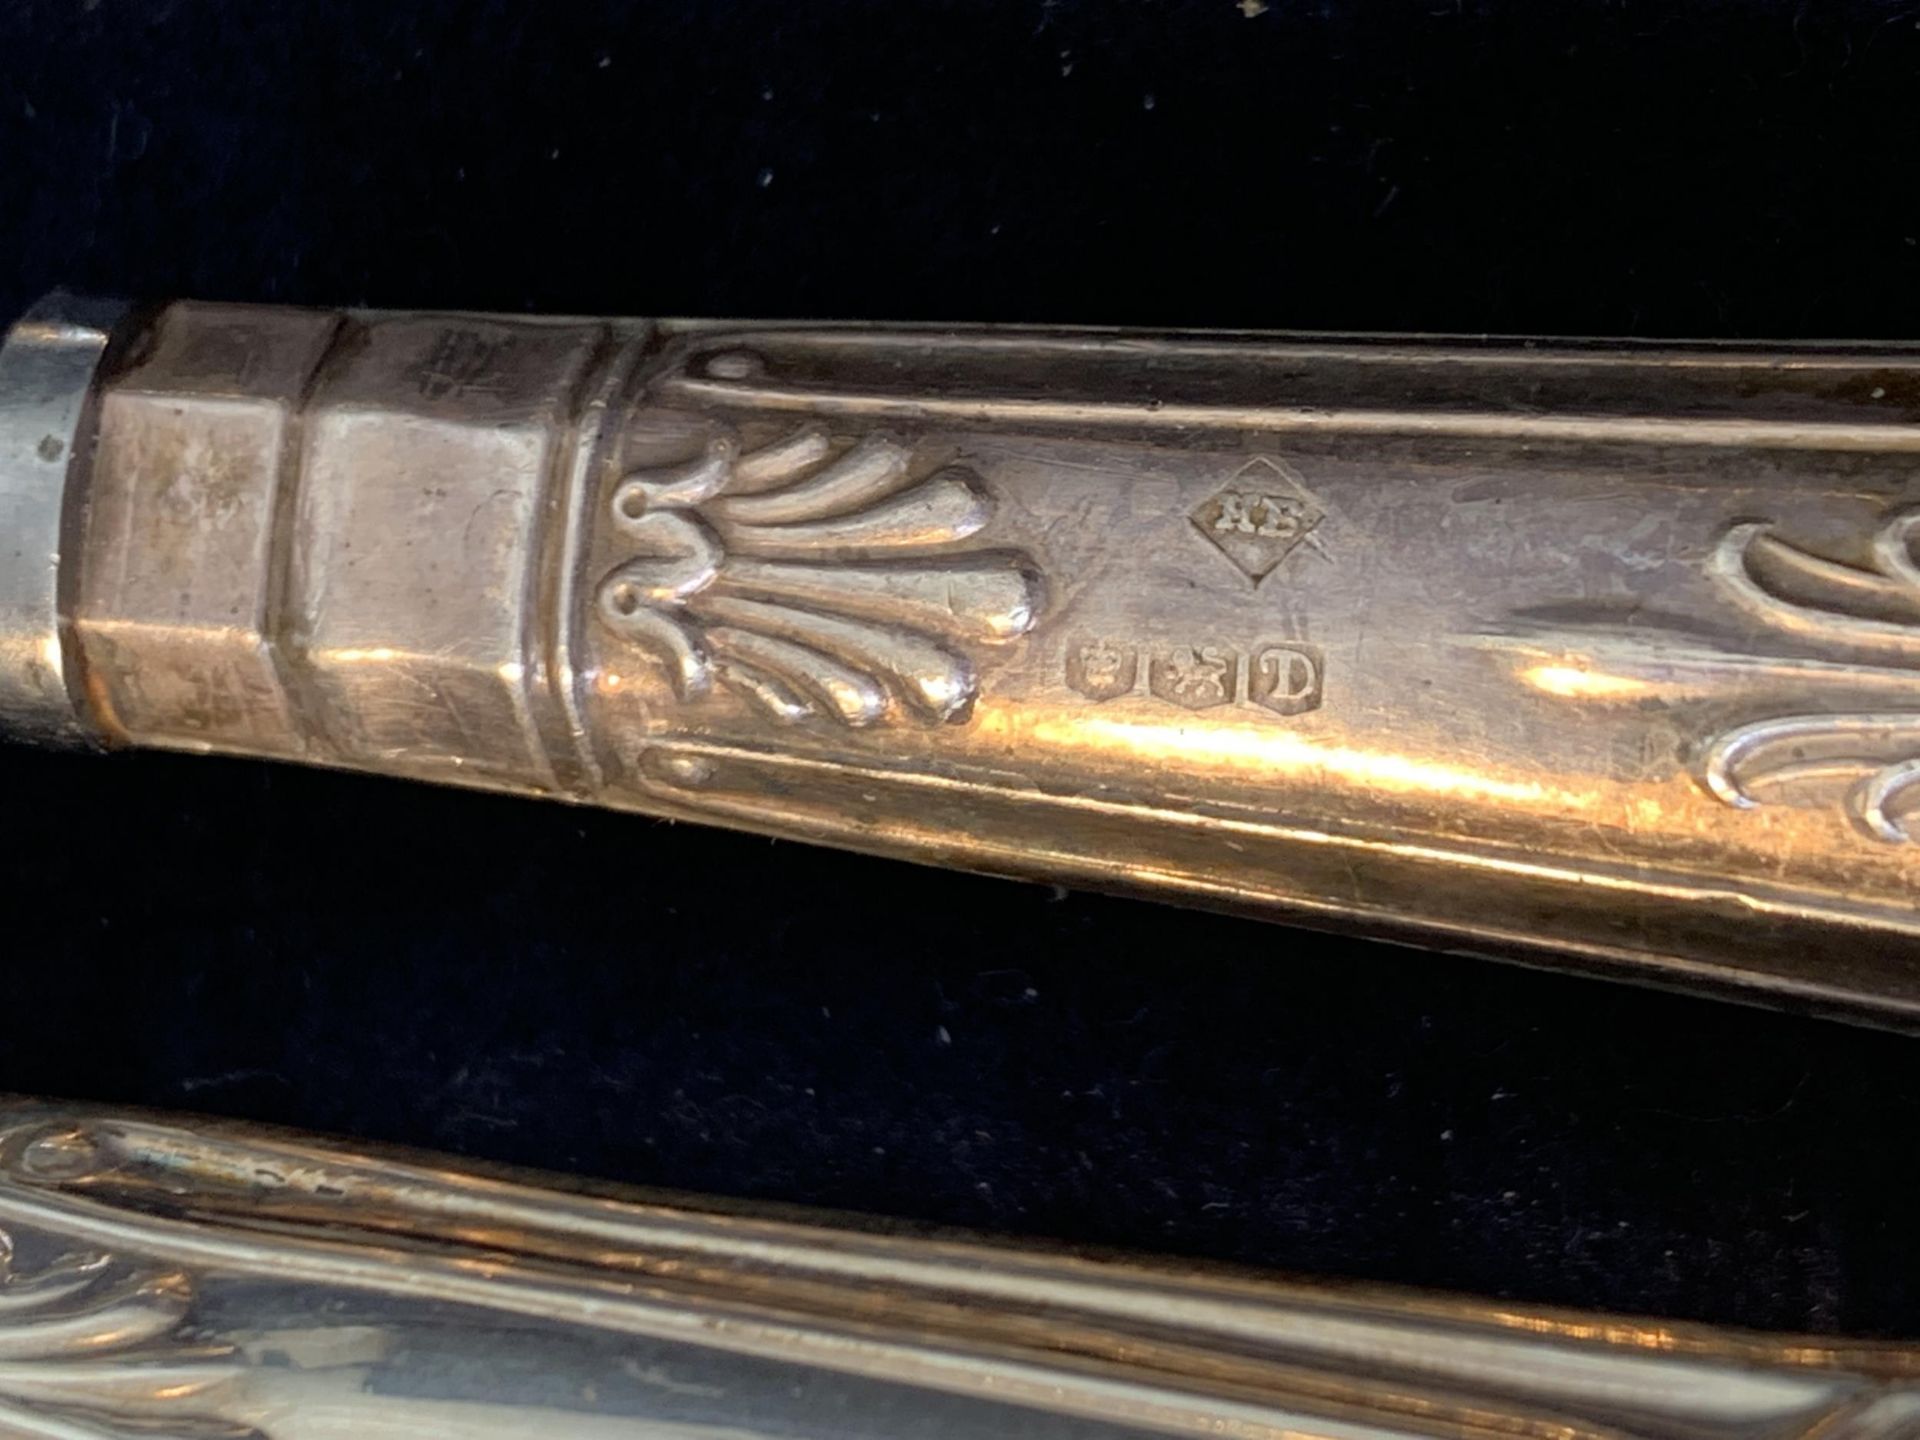 THREE HALLMARKED SILVER HANDLED ITEMS TO INCLUDE A KNIFE, FORK AND SPOON IN A PRESENTATION BOX - Image 3 of 3